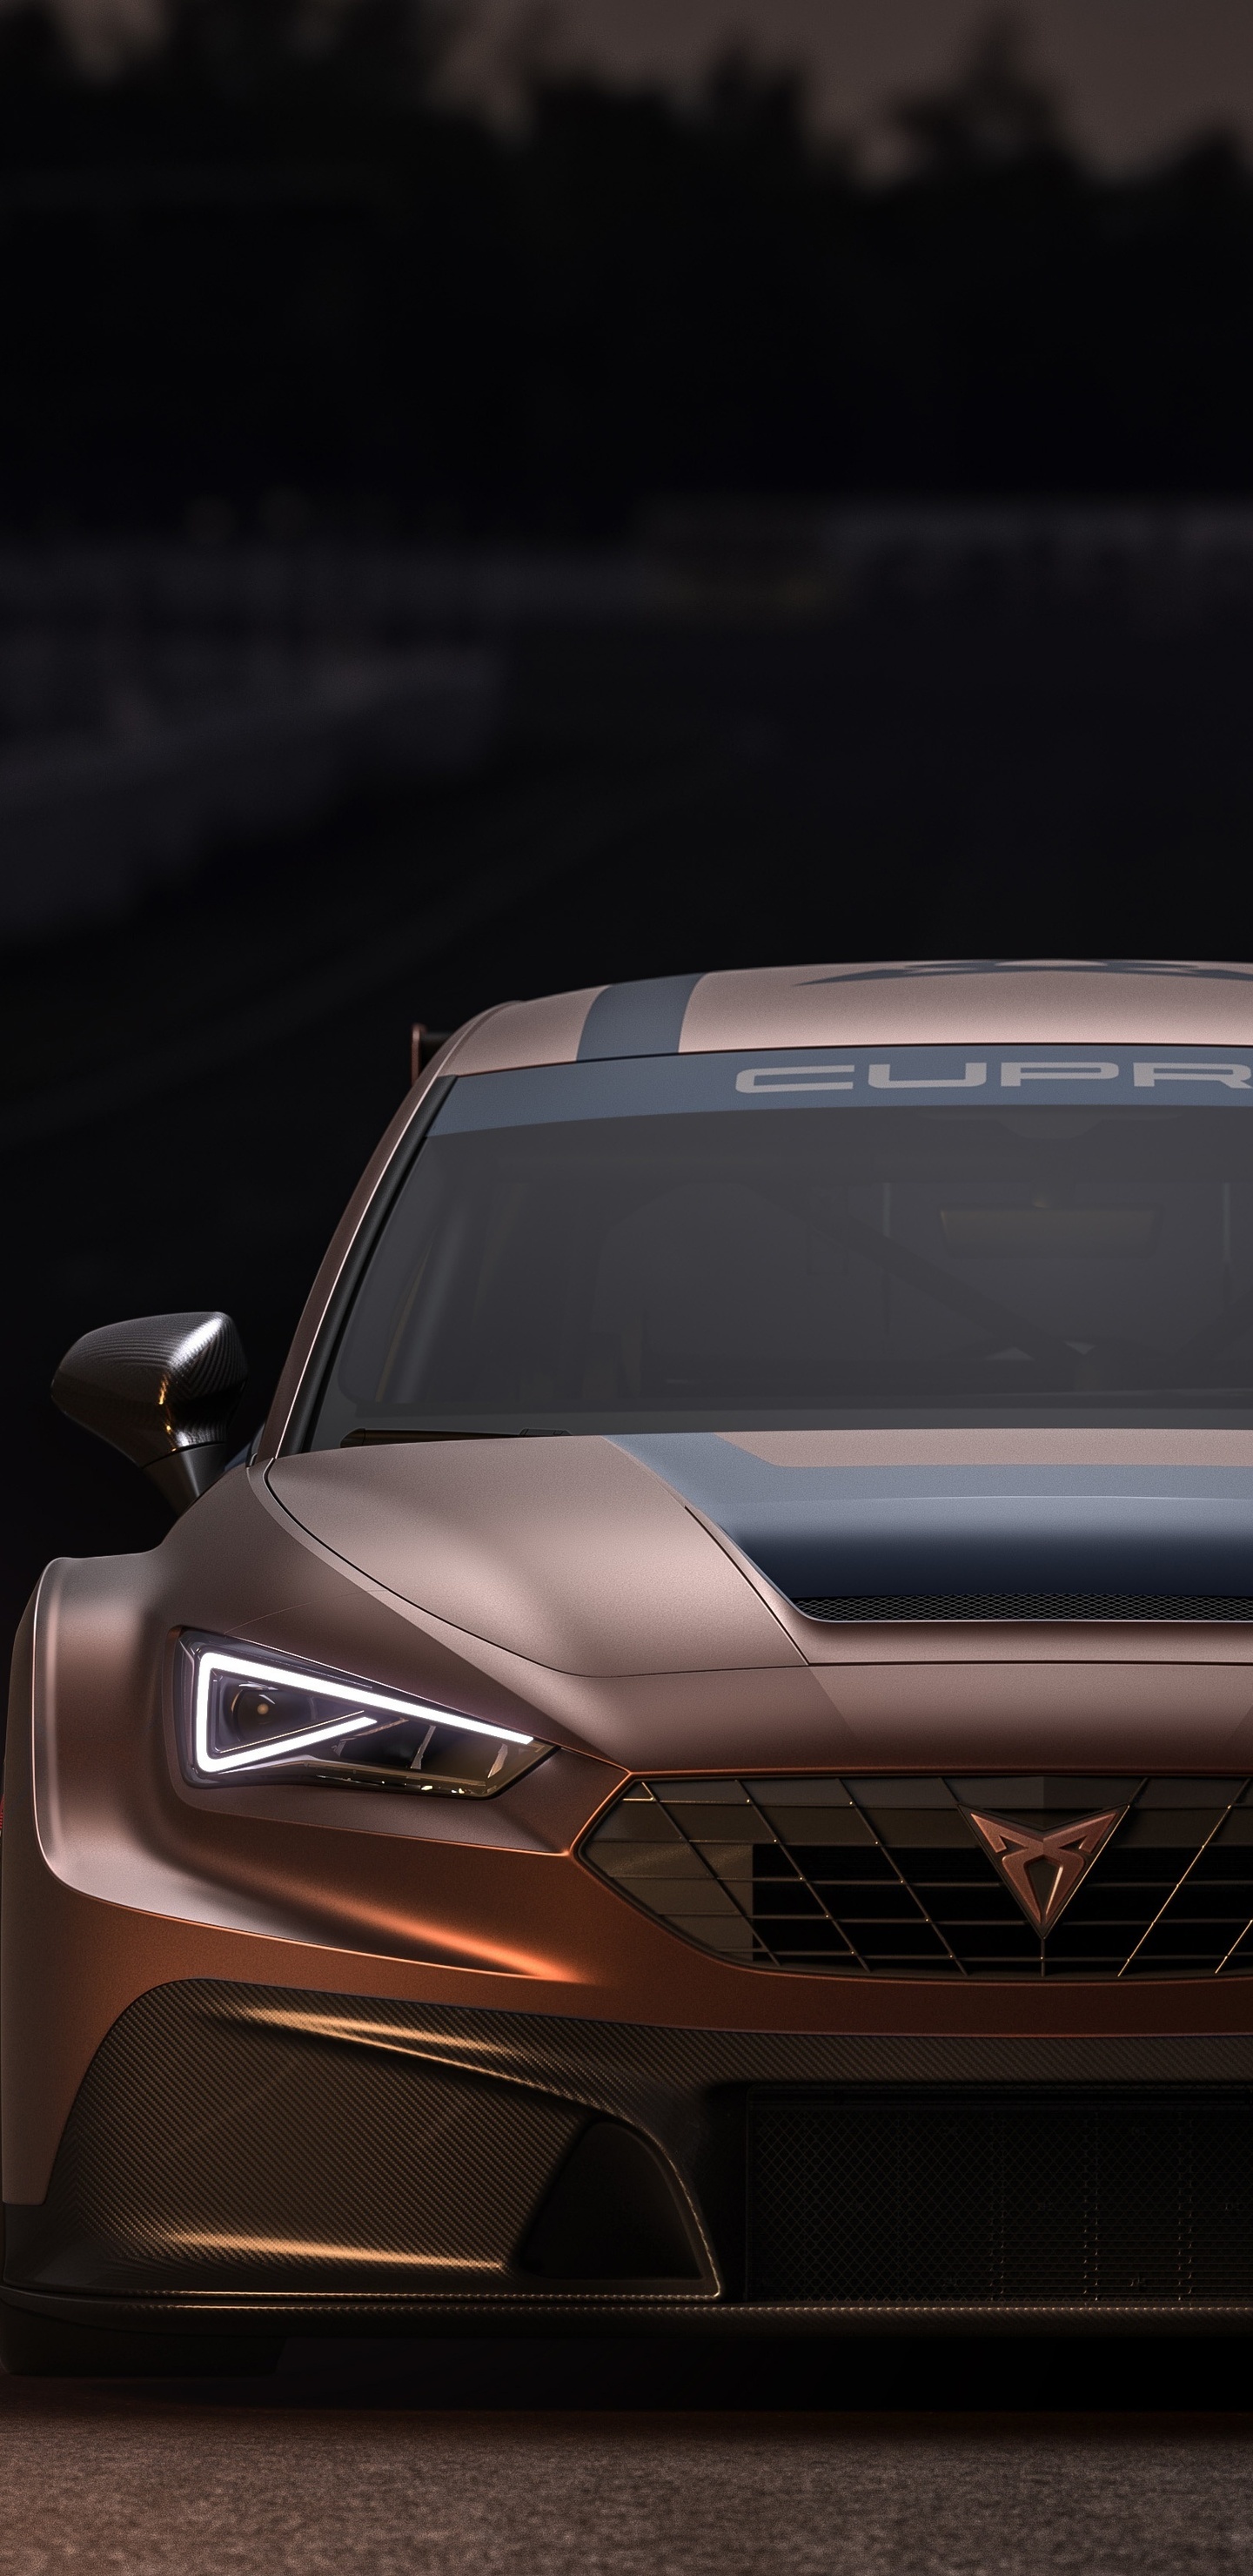 Seat Leon, 2020 samsung galaxy note, Images backgrounds photos, Competition cupra, 1440x2960 HD Phone